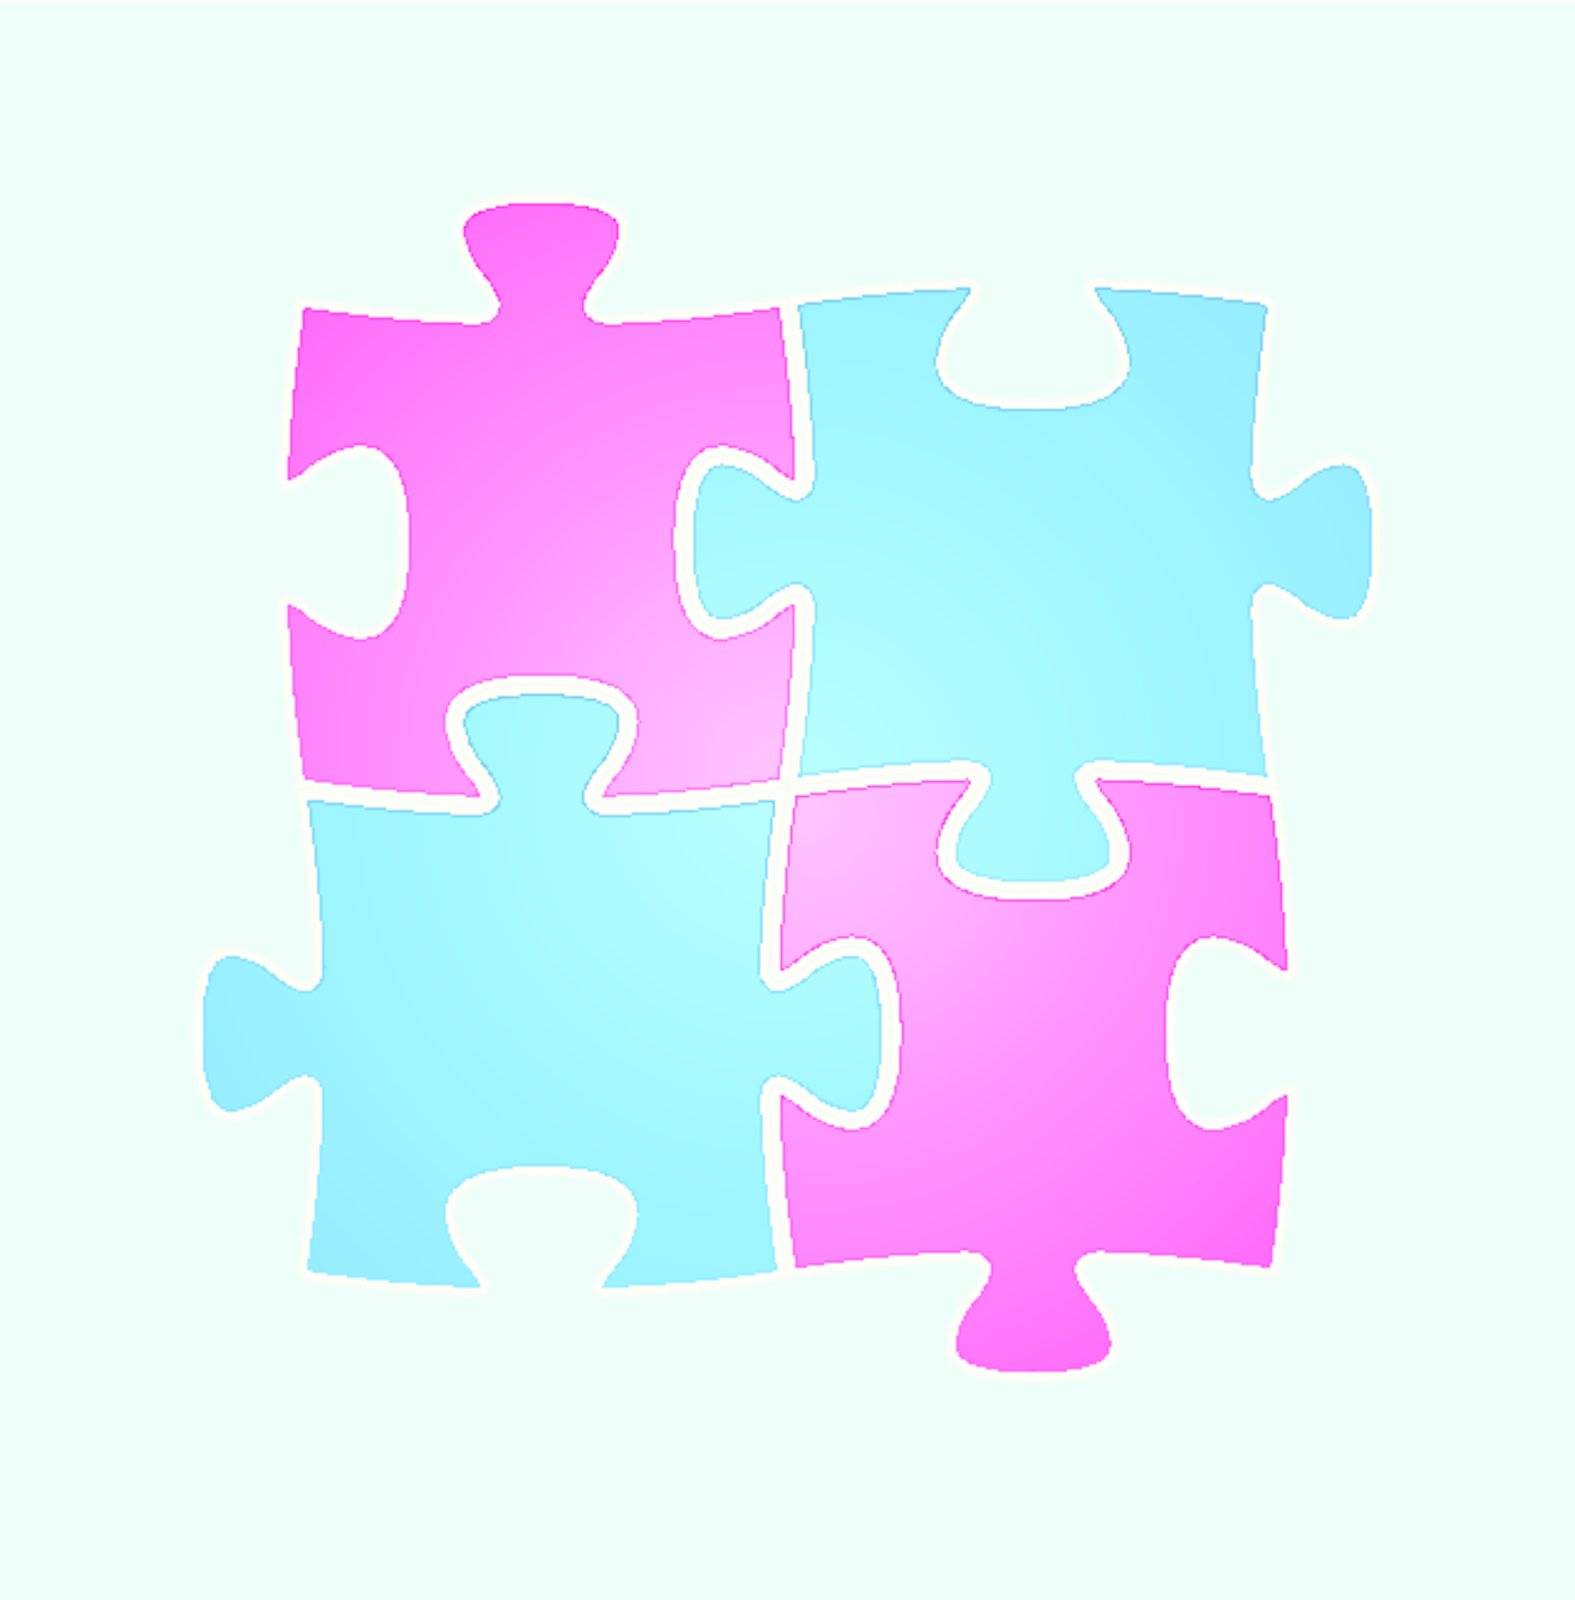 The composition made out of blue and pink puzzle piece